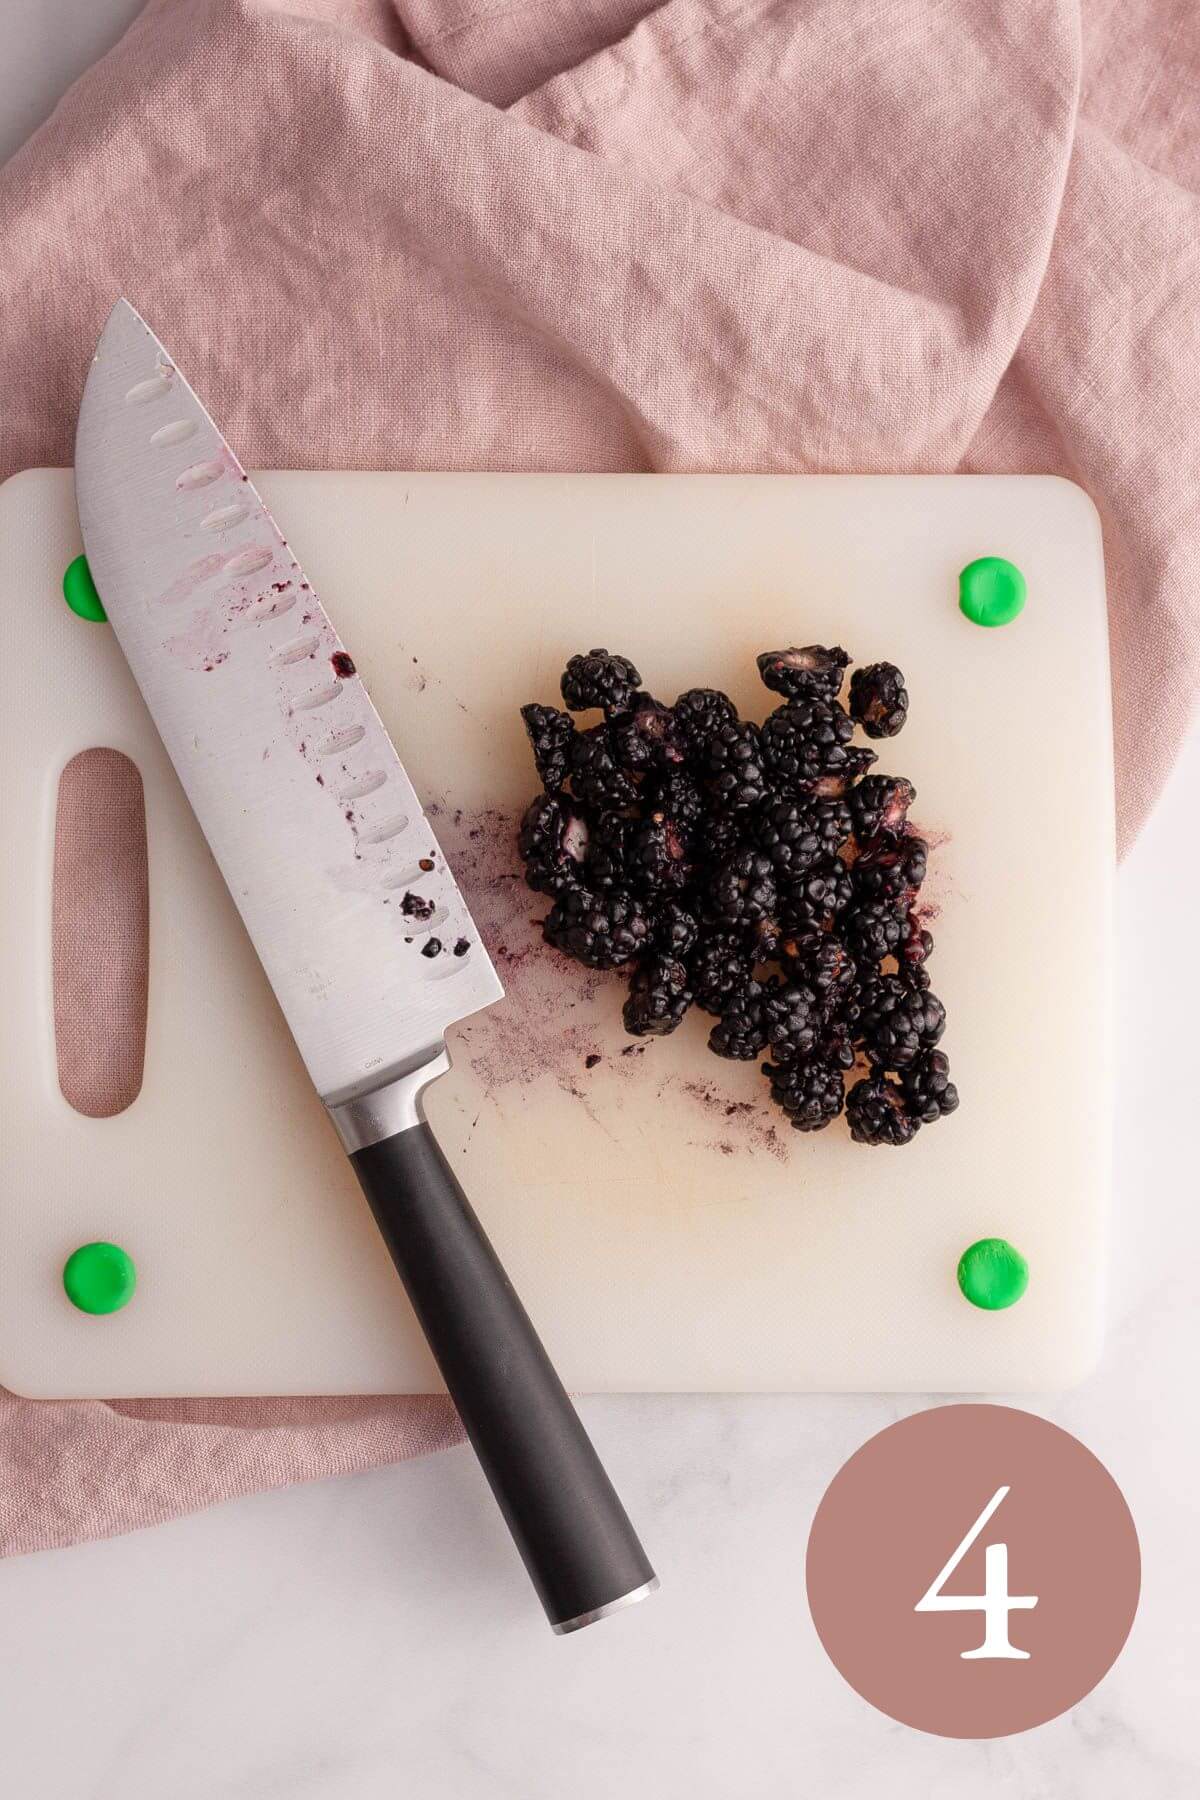 overhead image of chopped blackberries on cutting board